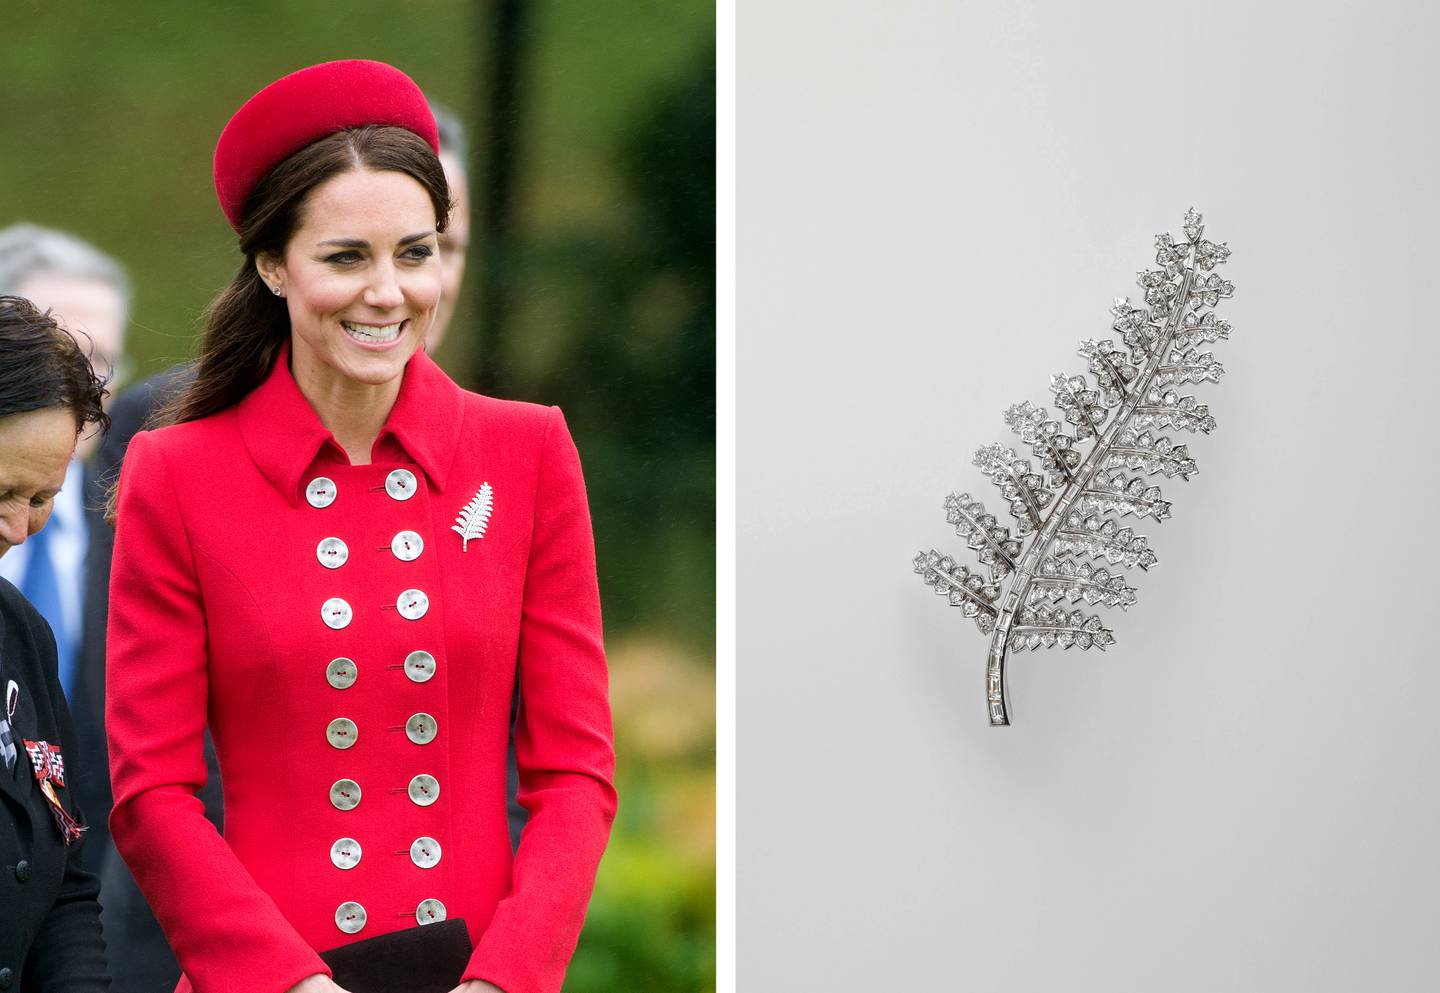 Catherine, Duchess of Cambridge, is seen wearing the New Zealand silver fern brooch. Photo: Royal Collection Trust / Getty Images